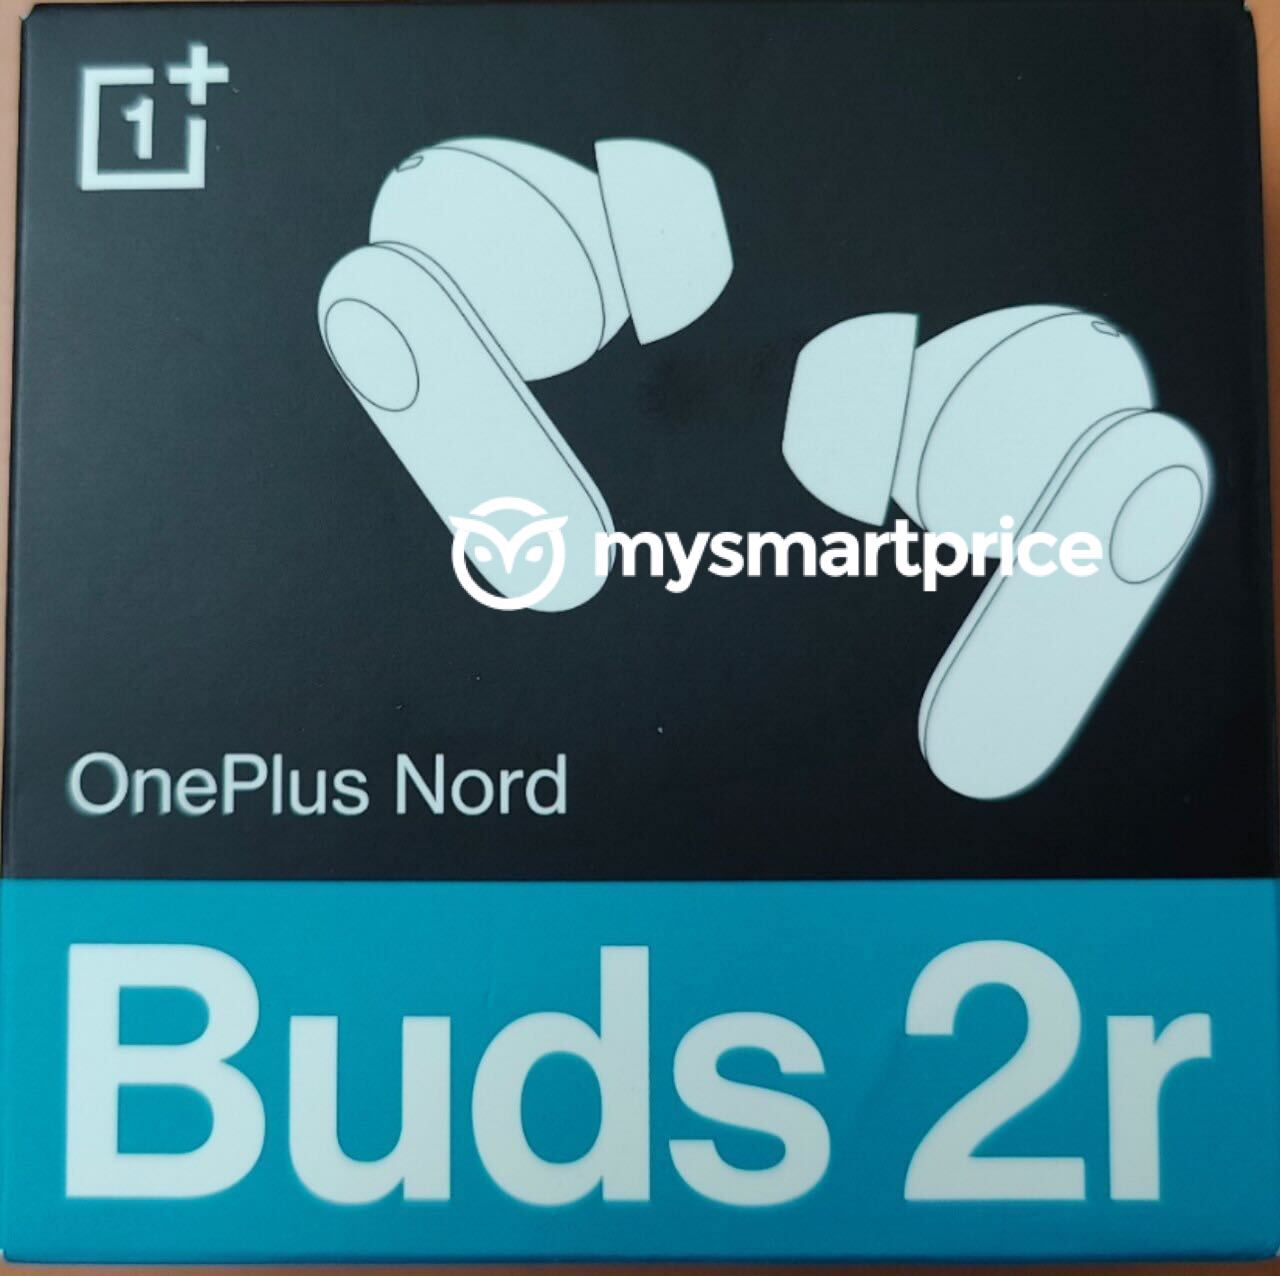 Oneplus Nord buds 2r Box image